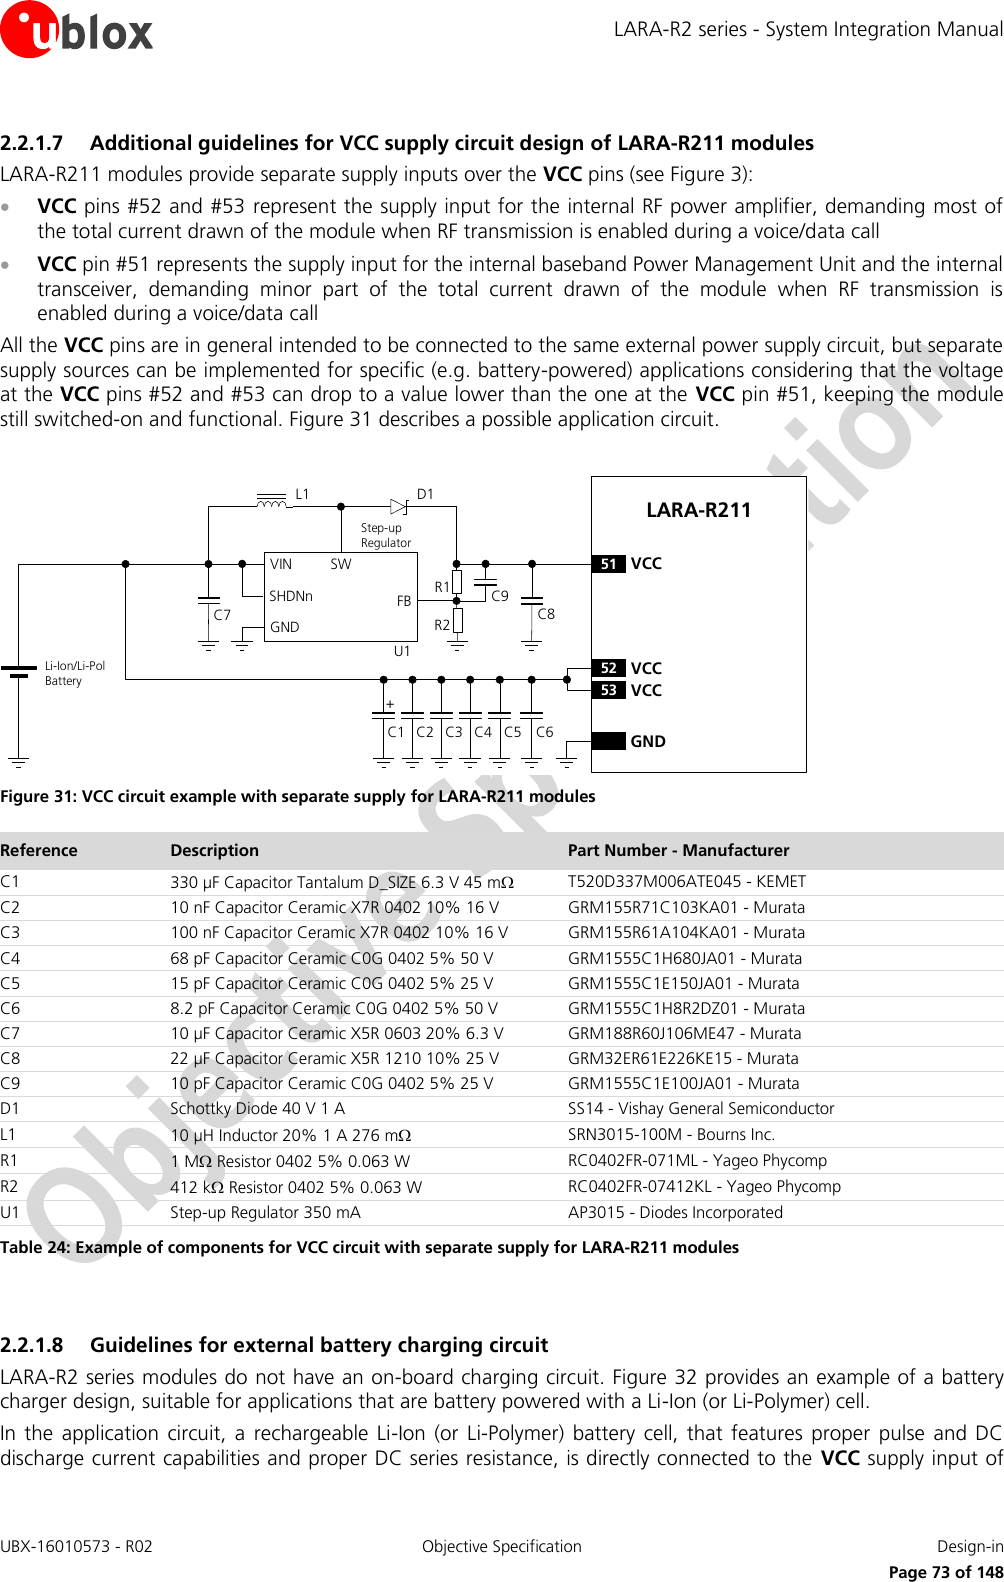 LARA-R2 series - System Integration Manual UBX-16010573 - R02  Objective Specification  Design-in     Page 73 of 148 2.2.1.7 Additional guidelines for VCC supply circuit design of LARA-R211 modules LARA-R211 modules provide separate supply inputs over the VCC pins (see Figure 3):  VCC pins #52 and #53 represent the supply input for the internal RF power amplifier, demanding most of the total current drawn of the module when RF transmission is enabled during a voice/data call  VCC pin #51 represents the supply input for the internal baseband Power Management Unit and the internal transceiver,  demanding  minor  part  of  the  total  current  drawn  of  the  module  when  RF  transmission  is enabled during a voice/data call All the VCC pins are in general intended to be connected to the same external power supply circuit, but separate supply sources can be implemented for specific (e.g. battery-powered) applications considering that the voltage at the VCC pins #52 and #53 can drop to a value lower than the one at the VCC pin #51, keeping the module still switched-on and functional. Figure 31 describes a possible application circuit.  C1 C4 GNDC3C2 C6LARA-R21152 VCC53 VCC51 VCC+Li-Ion/Li-Pol BatteryC7SWVINSHDNnGNDFB C8R1R2L1U1Step-up RegulatorD1C9C5 Figure 31: VCC circuit example with separate supply for LARA-R211 modules Reference Description Part Number - Manufacturer C1 330 µF Capacitor Tantalum D_SIZE 6.3 V 45 m T520D337M006ATE045 - KEMET C2 10 nF Capacitor Ceramic X7R 0402 10% 16 V GRM155R71C103KA01 - Murata C3 100 nF Capacitor Ceramic X7R 0402 10% 16 V GRM155R61A104KA01 - Murata C4 68 pF Capacitor Ceramic C0G 0402 5% 50 V GRM1555C1H680JA01 - Murata C5 15 pF Capacitor Ceramic C0G 0402 5% 25 V  GRM1555C1E150JA01 - Murata C6 8.2 pF Capacitor Ceramic C0G 0402 5% 50 V GRM1555C1H8R2DZ01 - Murata C7 10 µF Capacitor Ceramic X5R 0603 20% 6.3 V GRM188R60J106ME47 - Murata C8 22 µF Capacitor Ceramic X5R 1210 10% 25 V GRM32ER61E226KE15 - Murata C9 10 pF Capacitor Ceramic C0G 0402 5% 25 V  GRM1555C1E100JA01 - Murata D1 Schottky Diode 40 V 1 A SS14 - Vishay General Semiconductor L1 10 µH Inductor 20% 1 A 276 m SRN3015-100M - Bourns Inc. R1 1 M Resistor 0402 5% 0.063 W RC0402FR-071ML - Yageo Phycomp R2 412 k Resistor 0402 5% 0.063 W RC0402FR-07412KL - Yageo Phycomp U1 Step-up Regulator 350 mA AP3015 - Diodes Incorporated Table 24: Example of components for VCC circuit with separate supply for LARA-R211 modules  2.2.1.8 Guidelines for external battery charging circuit LARA-R2 series modules do not have an on-board charging circuit. Figure 32 provides an example of a battery charger design, suitable for applications that are battery powered with a Li-Ion (or Li-Polymer) cell. In  the  application  circuit,  a  rechargeable  Li-Ion  (or  Li-Polymer)  battery  cell,  that  features  proper  pulse  and  DC discharge current capabilities and proper DC series resistance, is directly connected to the  VCC supply input of 